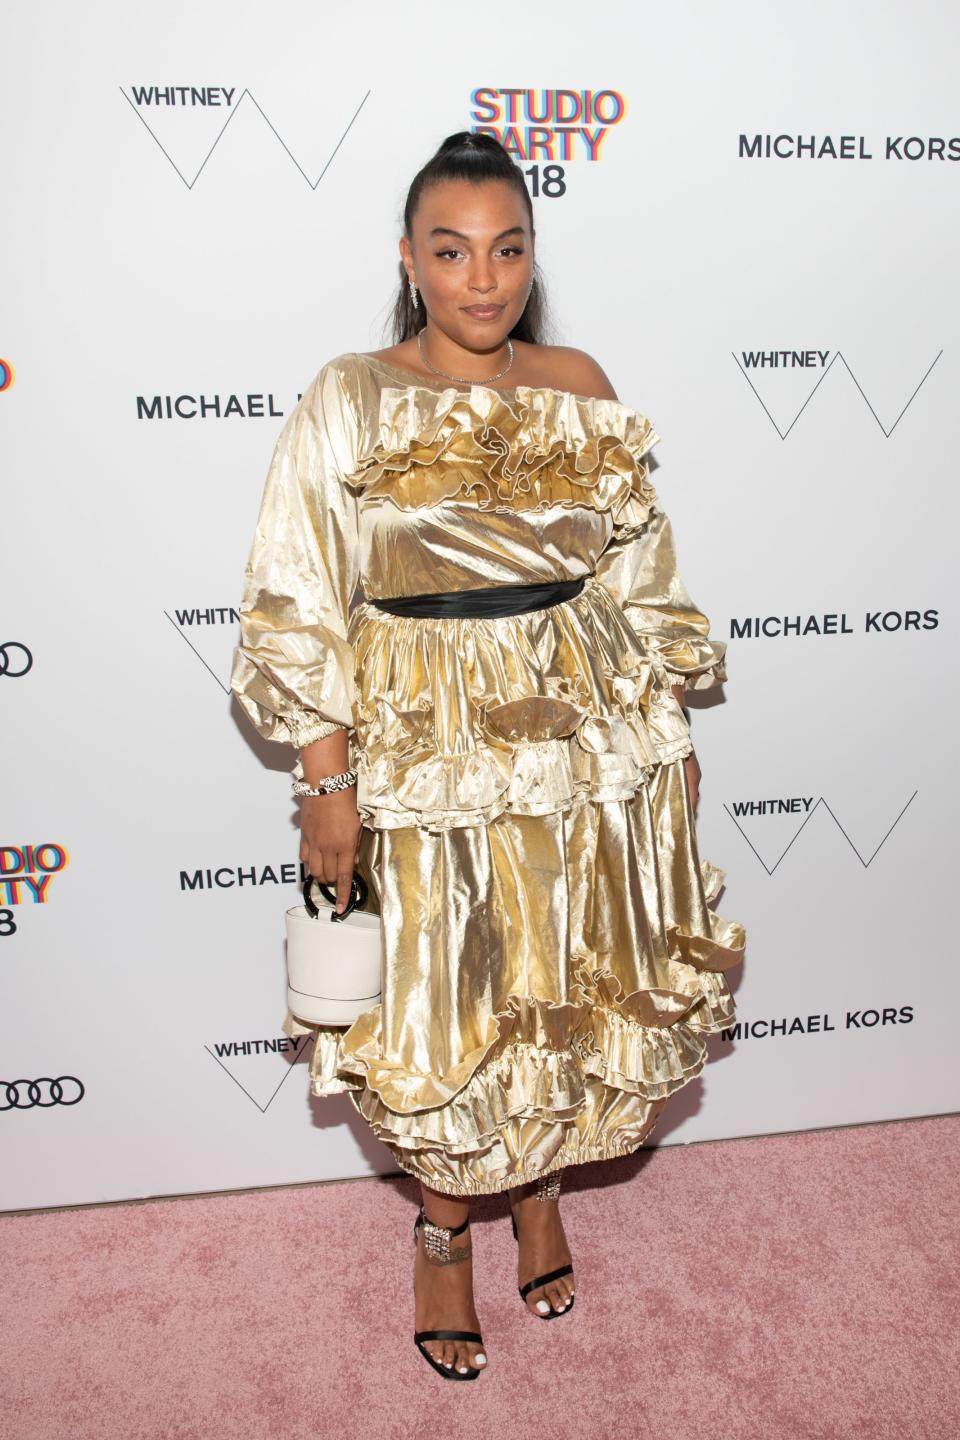 <p>WHO: Paloma Elsesser</p> <p>WHAT: Molly Goddard and Simon Miller bag</p> <p>WHERE: At the Whitney Museum Studio Party, New York City</p> <p>WHEN: May 22, 2018</p>